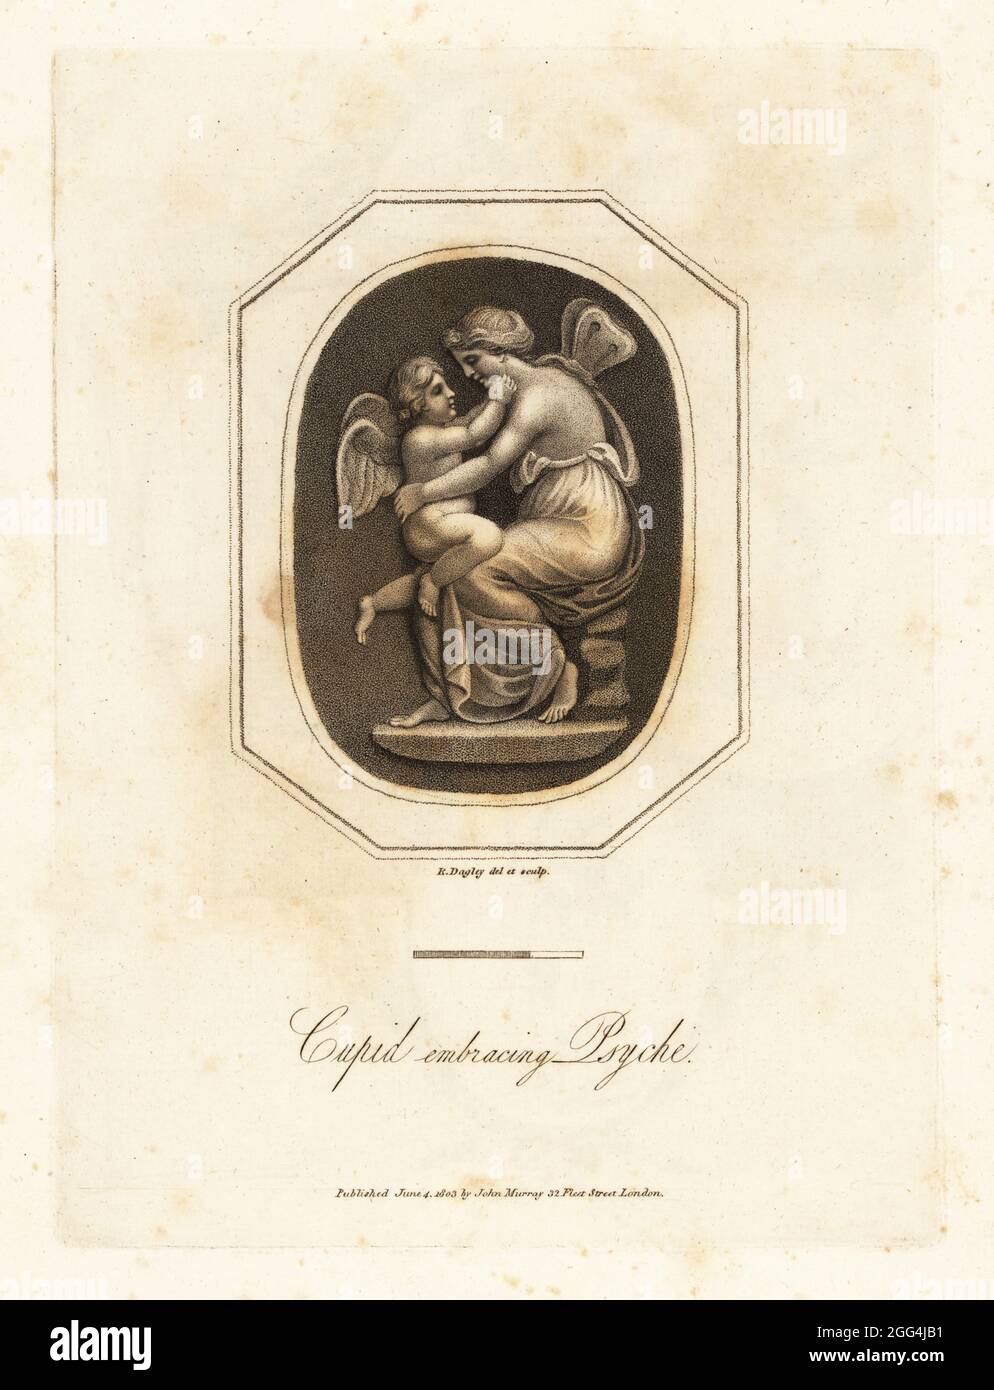 Cupid embracing Psyche, Greek goddess of the soul. From a cameo in the possession of Marquis Selini. Copperplate engraving drawn and engraved by Richard Dagley from Gems, Selected from the Antique, with Illustrations, John Murray, London, 1804. Stock Photo